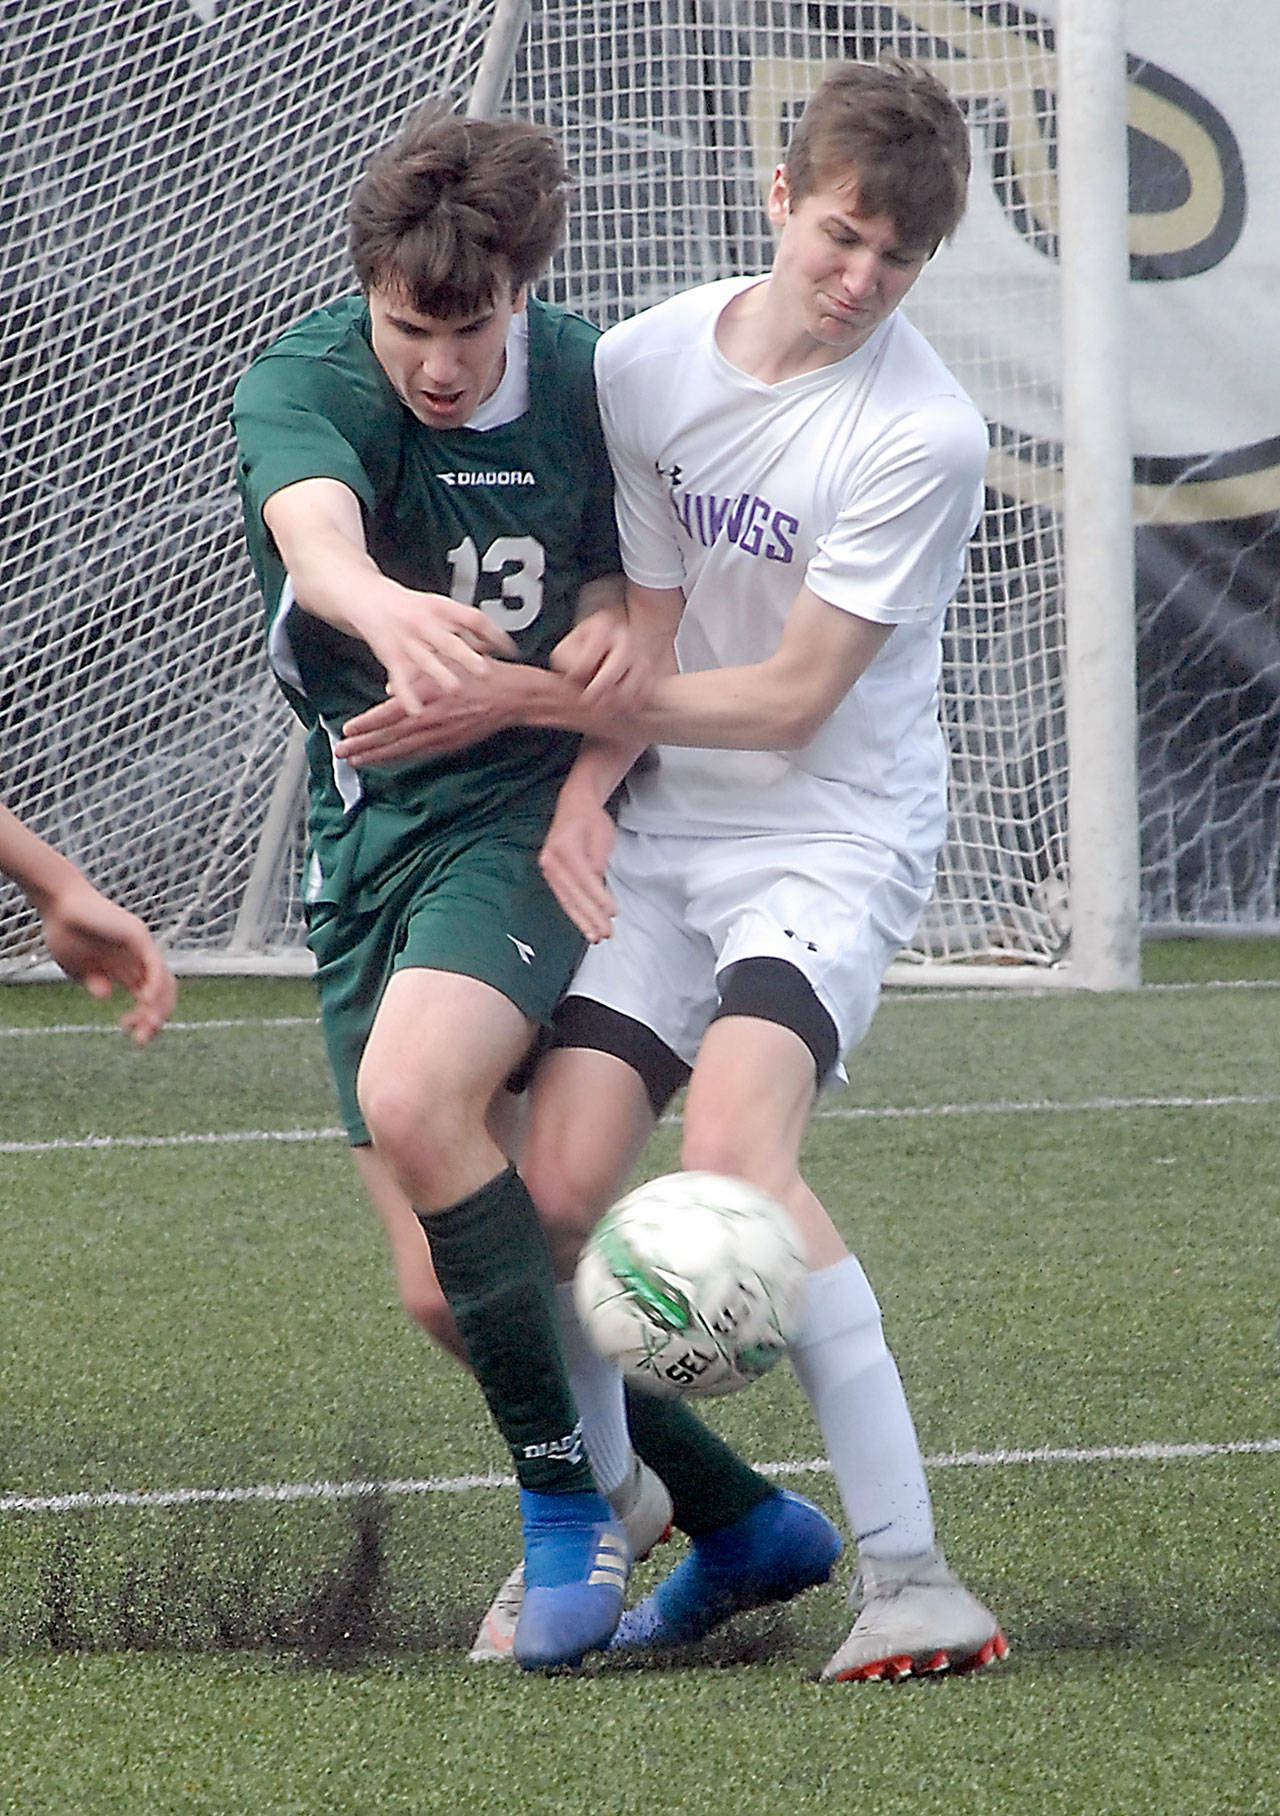 Port Angeles’ Stuart Methner, left, and North Kitsap’s Cameron Peaslee battle for the ball during Saturday’s match at Peninsula College in Port Angeles.                                Keith Thorpe/Peninsula Daily News